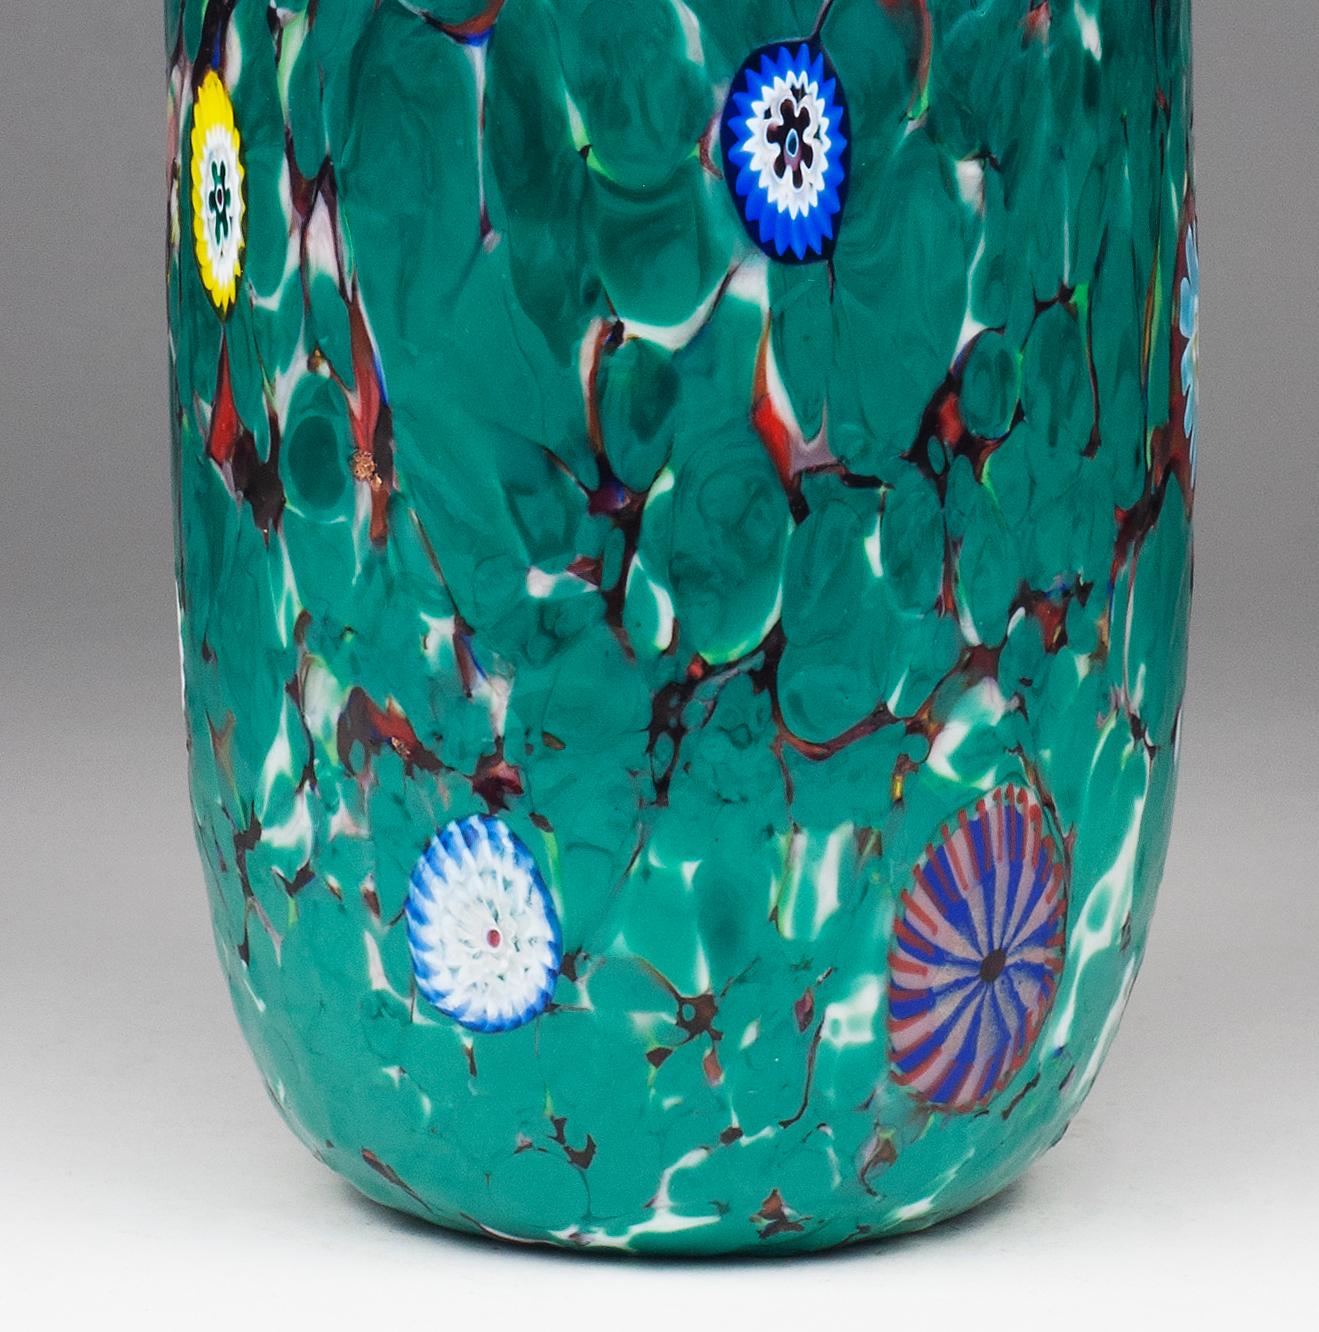 Hand-Crafted MARMORINO, Murano glass vase by Fratelli Toso, 1955